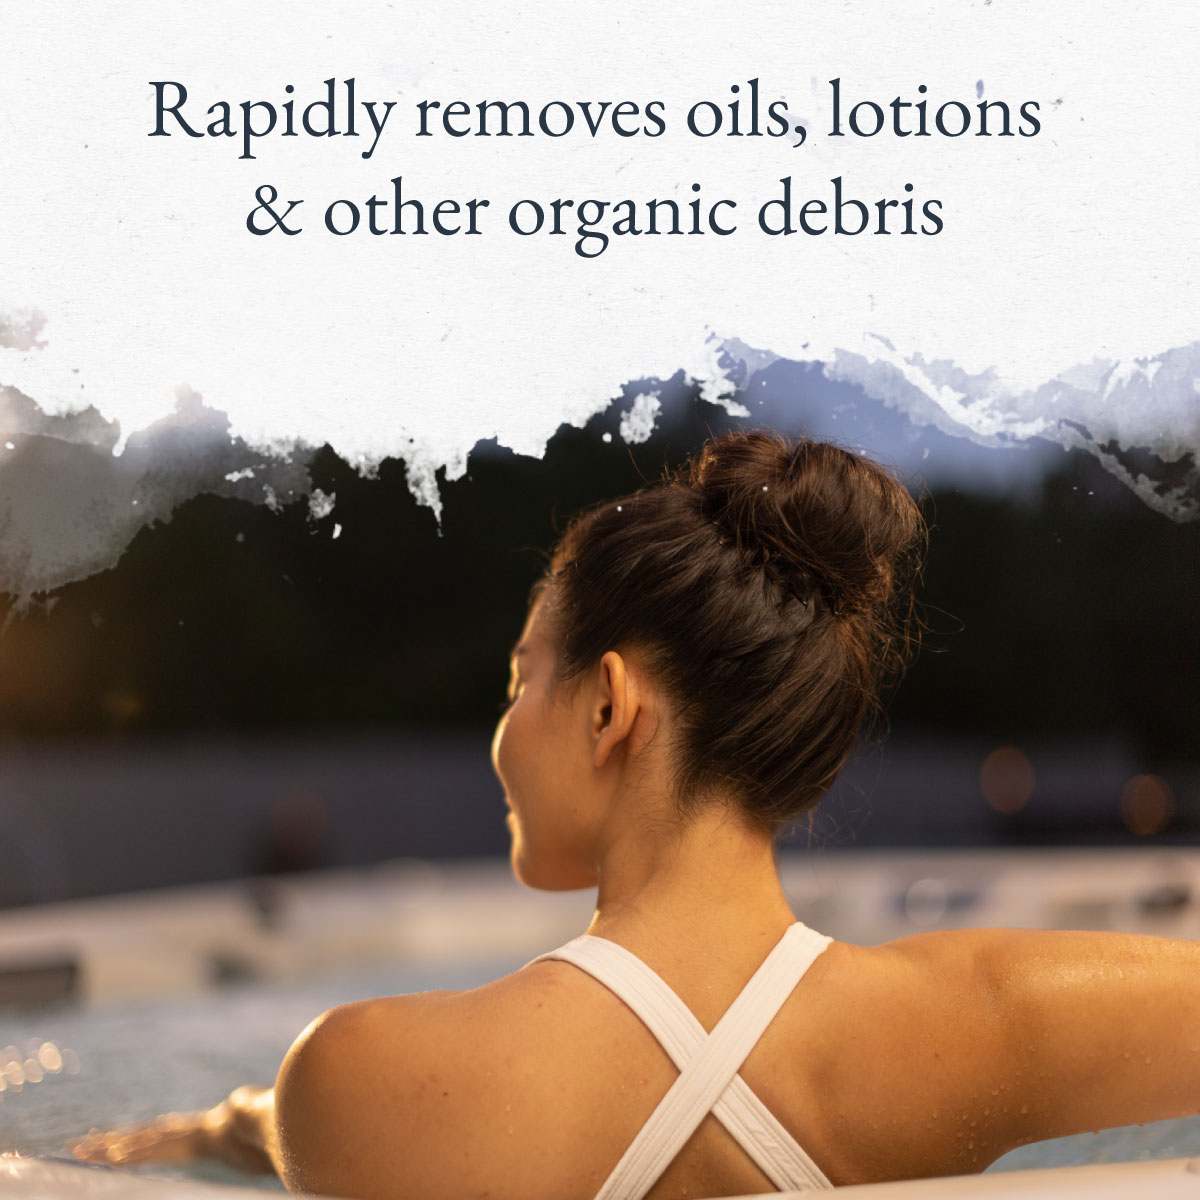 Rapidly removes oils, lotions & other organic debris